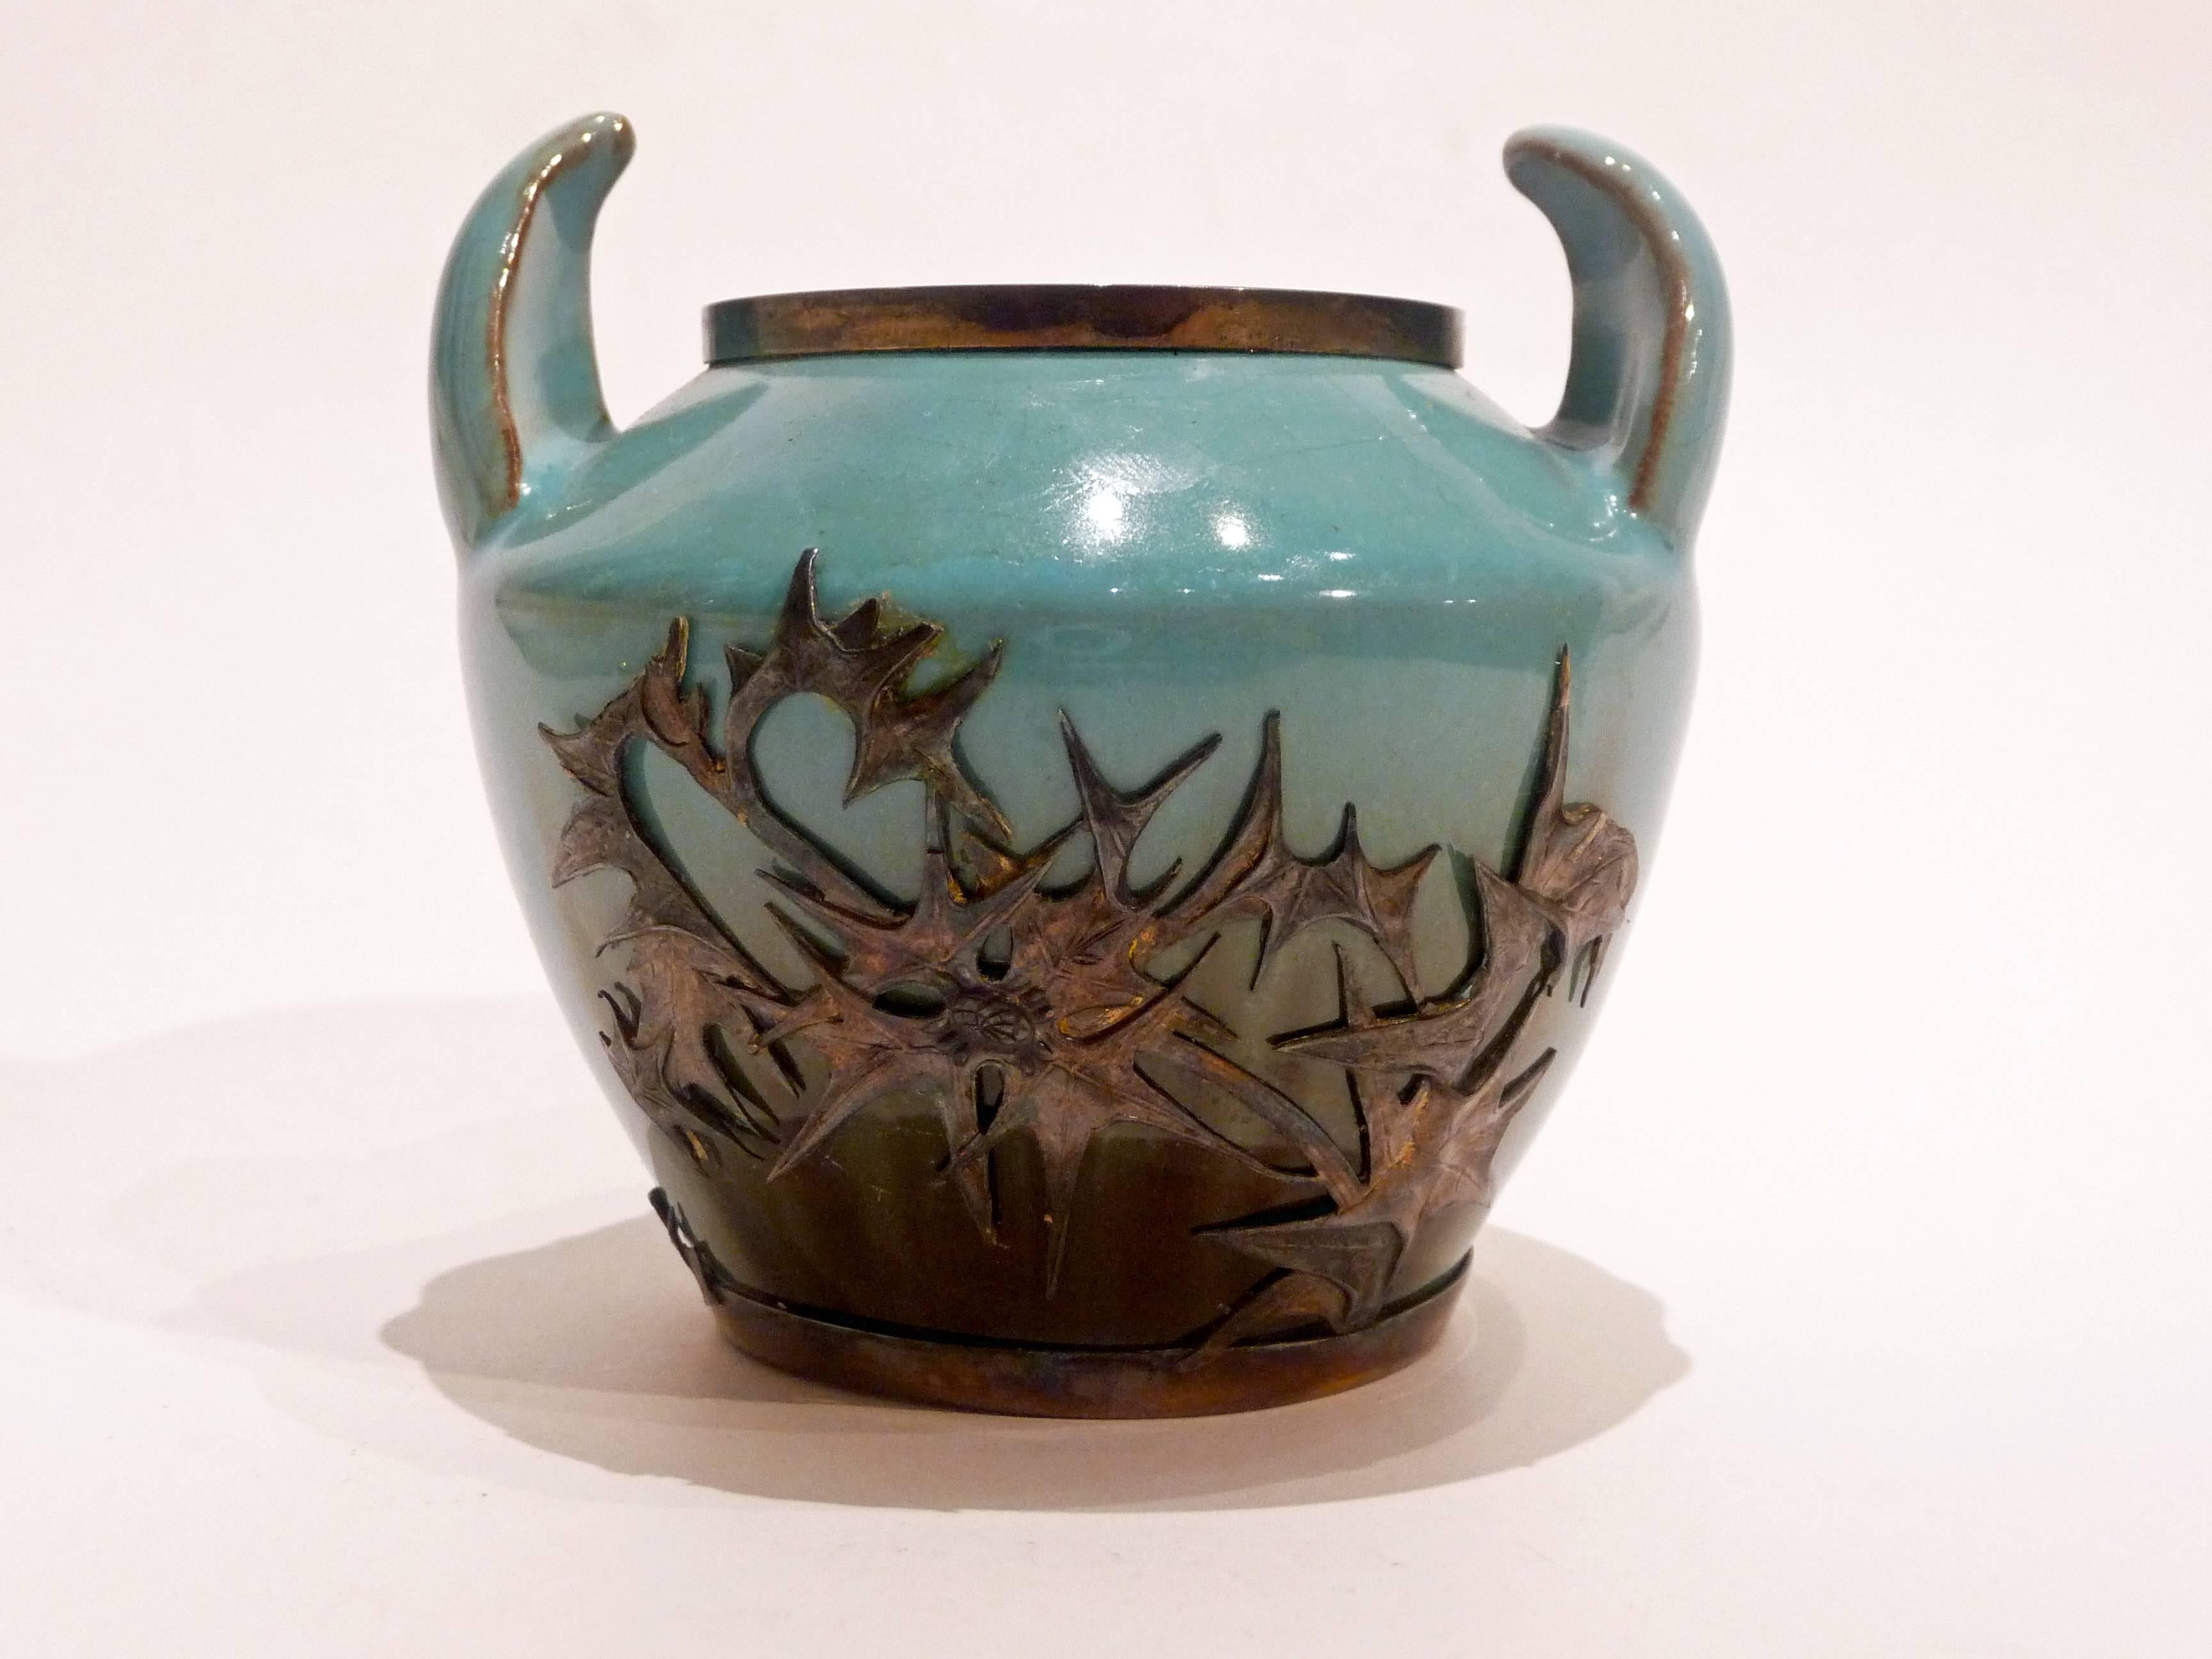 Clément Massier
Lucien Gaillard
An Art Nouveau vase
Turquoise and brown ceramic with two handles in shape of horns imitating Chinese vases
Silver mount decorated with thistles
With silver and maker’s marks
Bibliography: Victor Arwas 